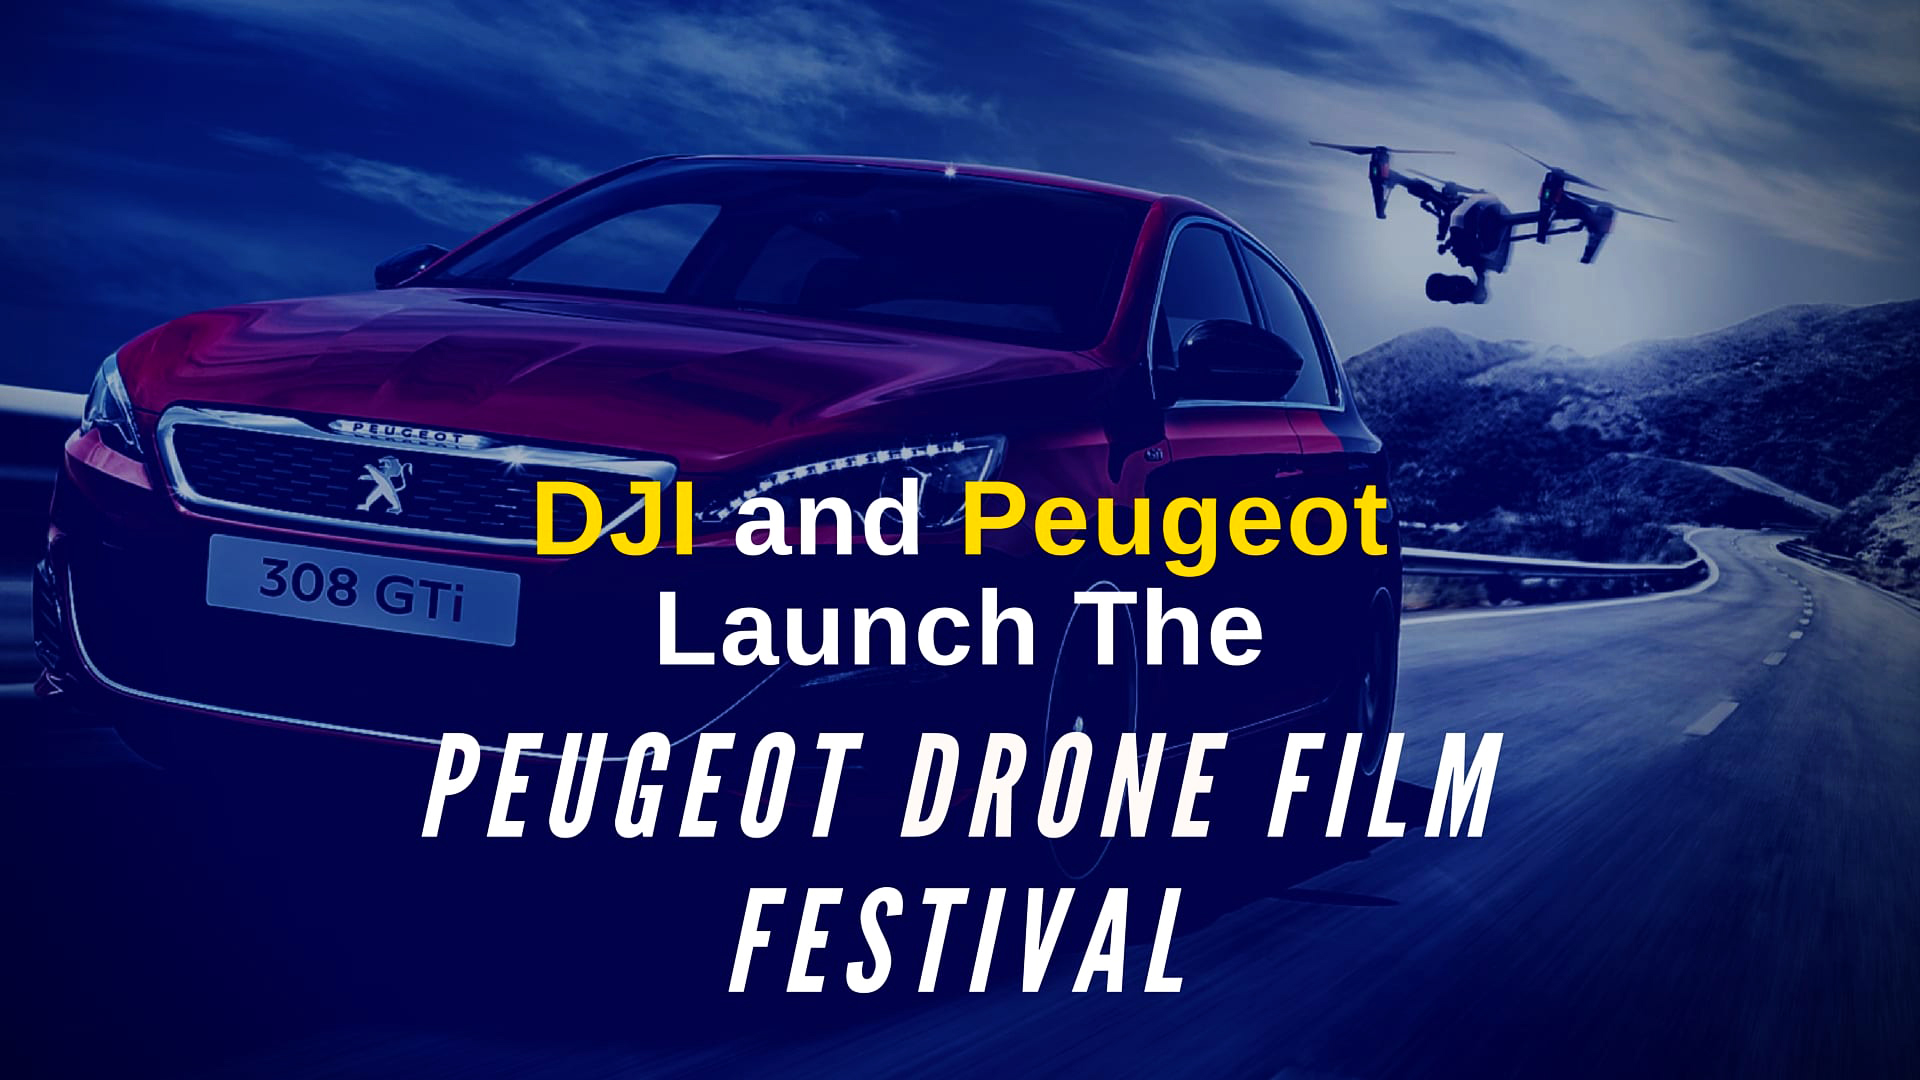 peugeot-drone-film-festival-launched-by-dji-and-peugeot-in-2016.jpg